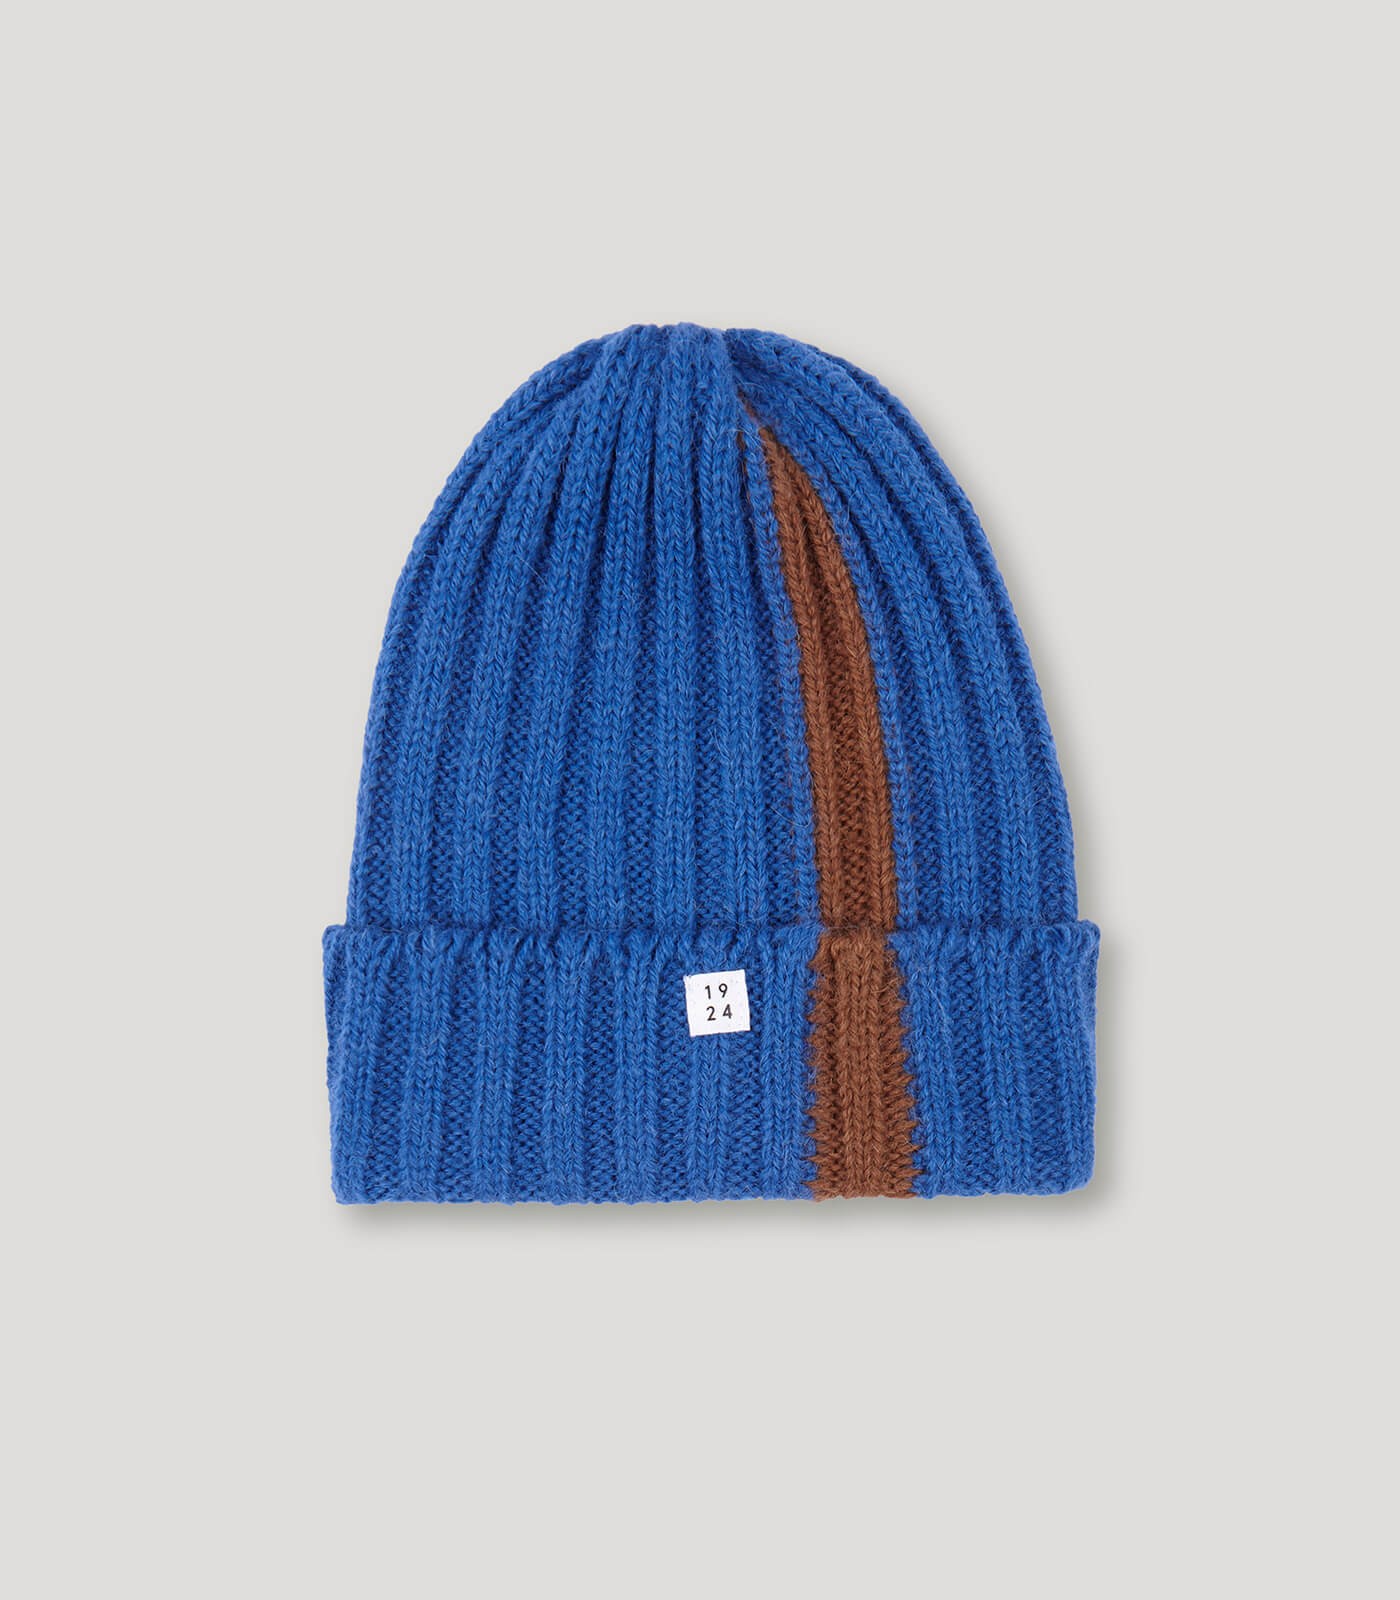 Blue- Brown Stripes Wool Knitted Hat